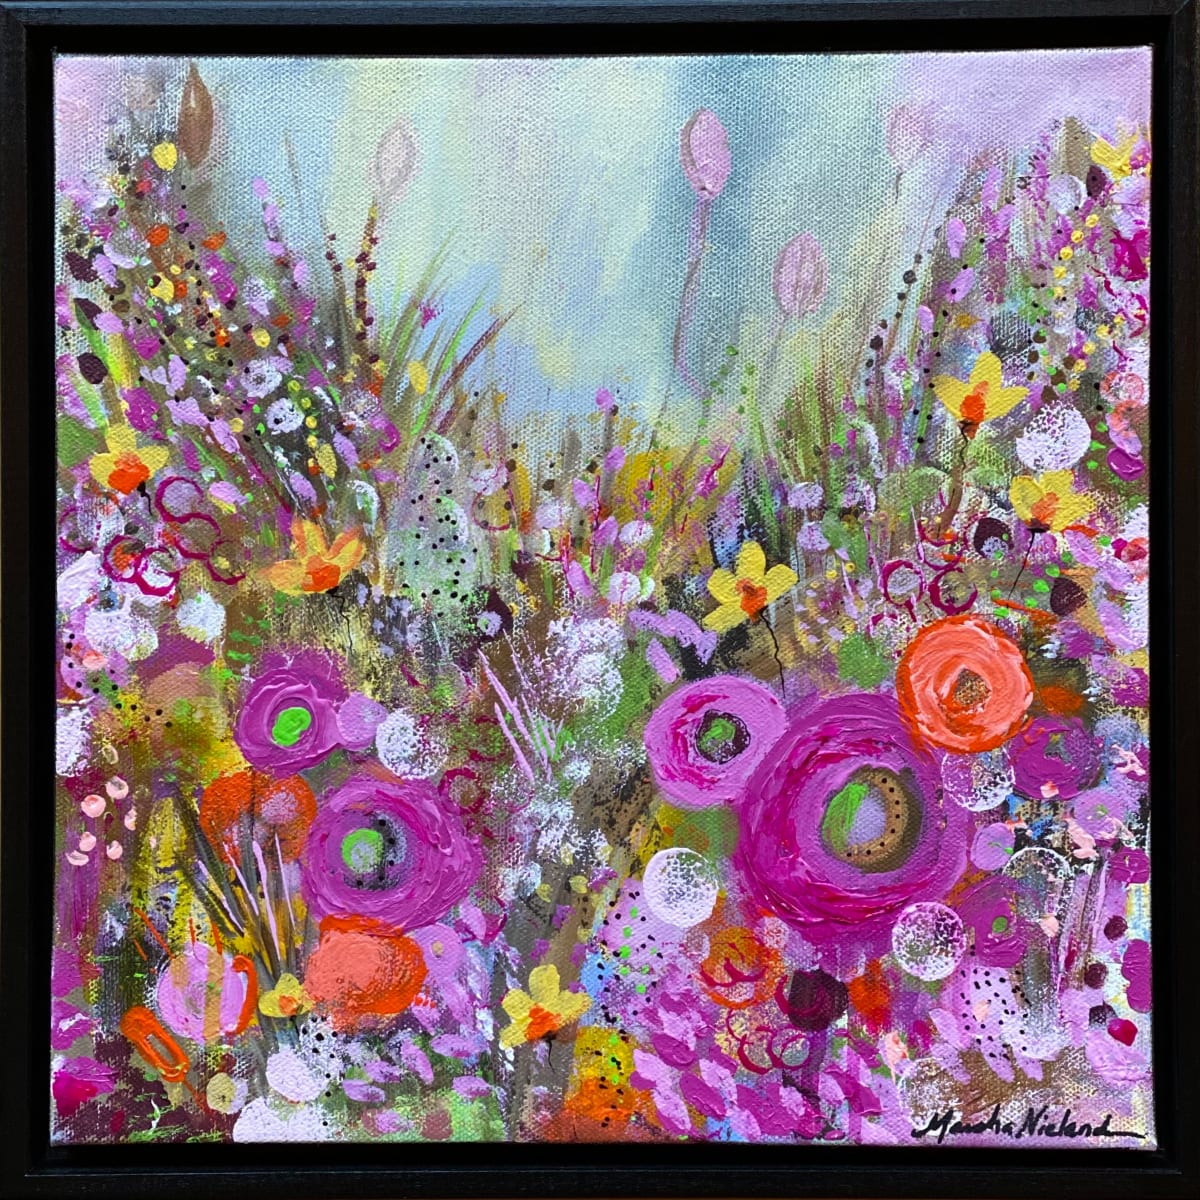 Natural & Free by Marsha Nieland  Image: Acrylic on 12x12 canvas with black floating frame.